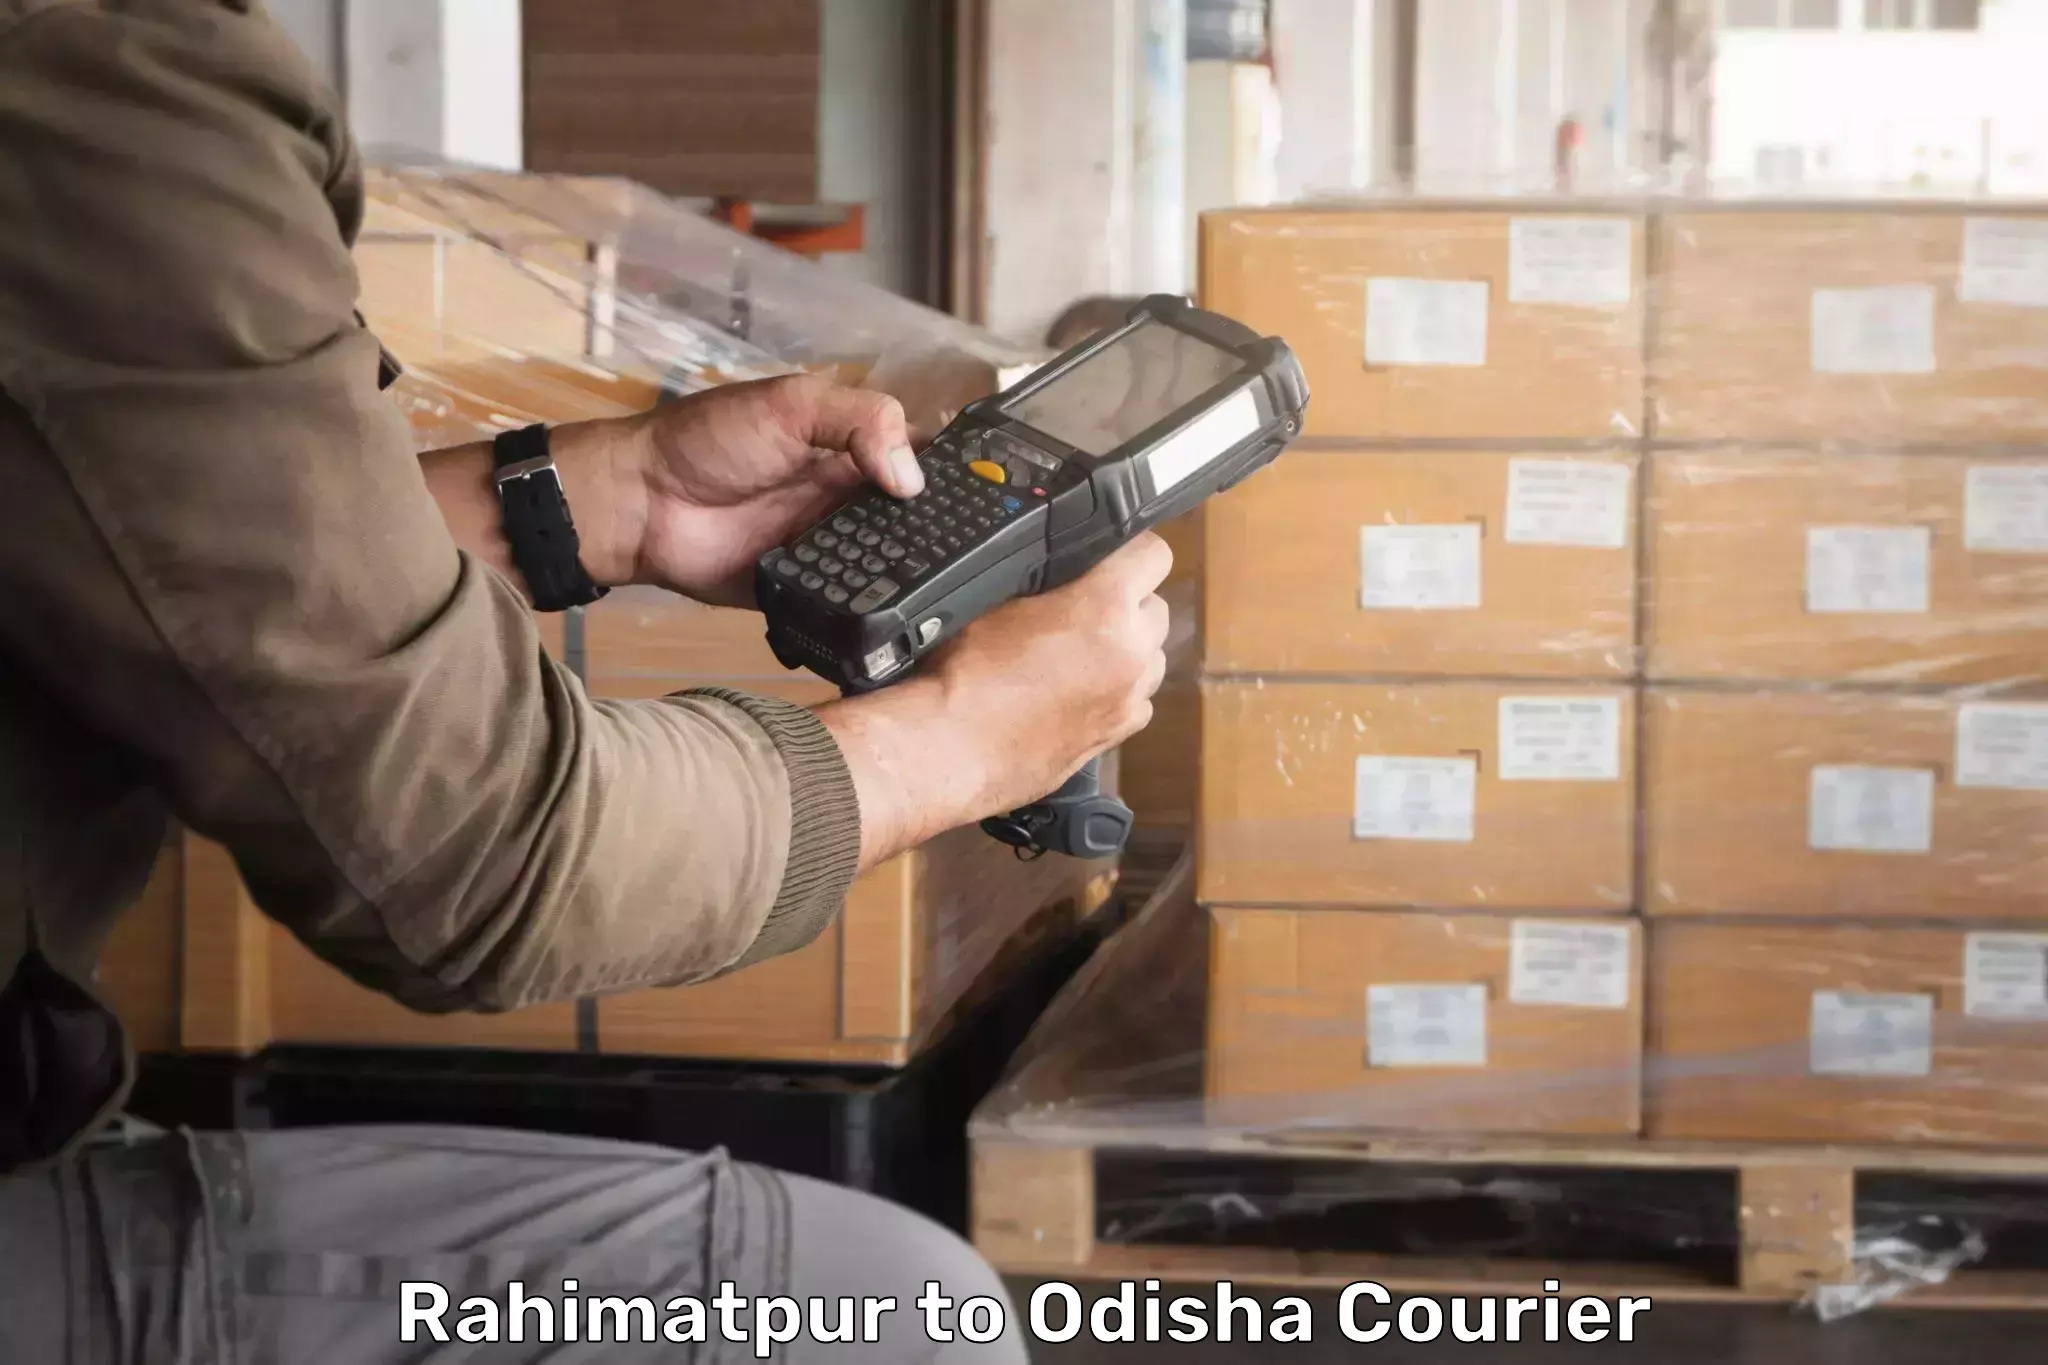 Sustainable courier practices Rahimatpur to Agarpada